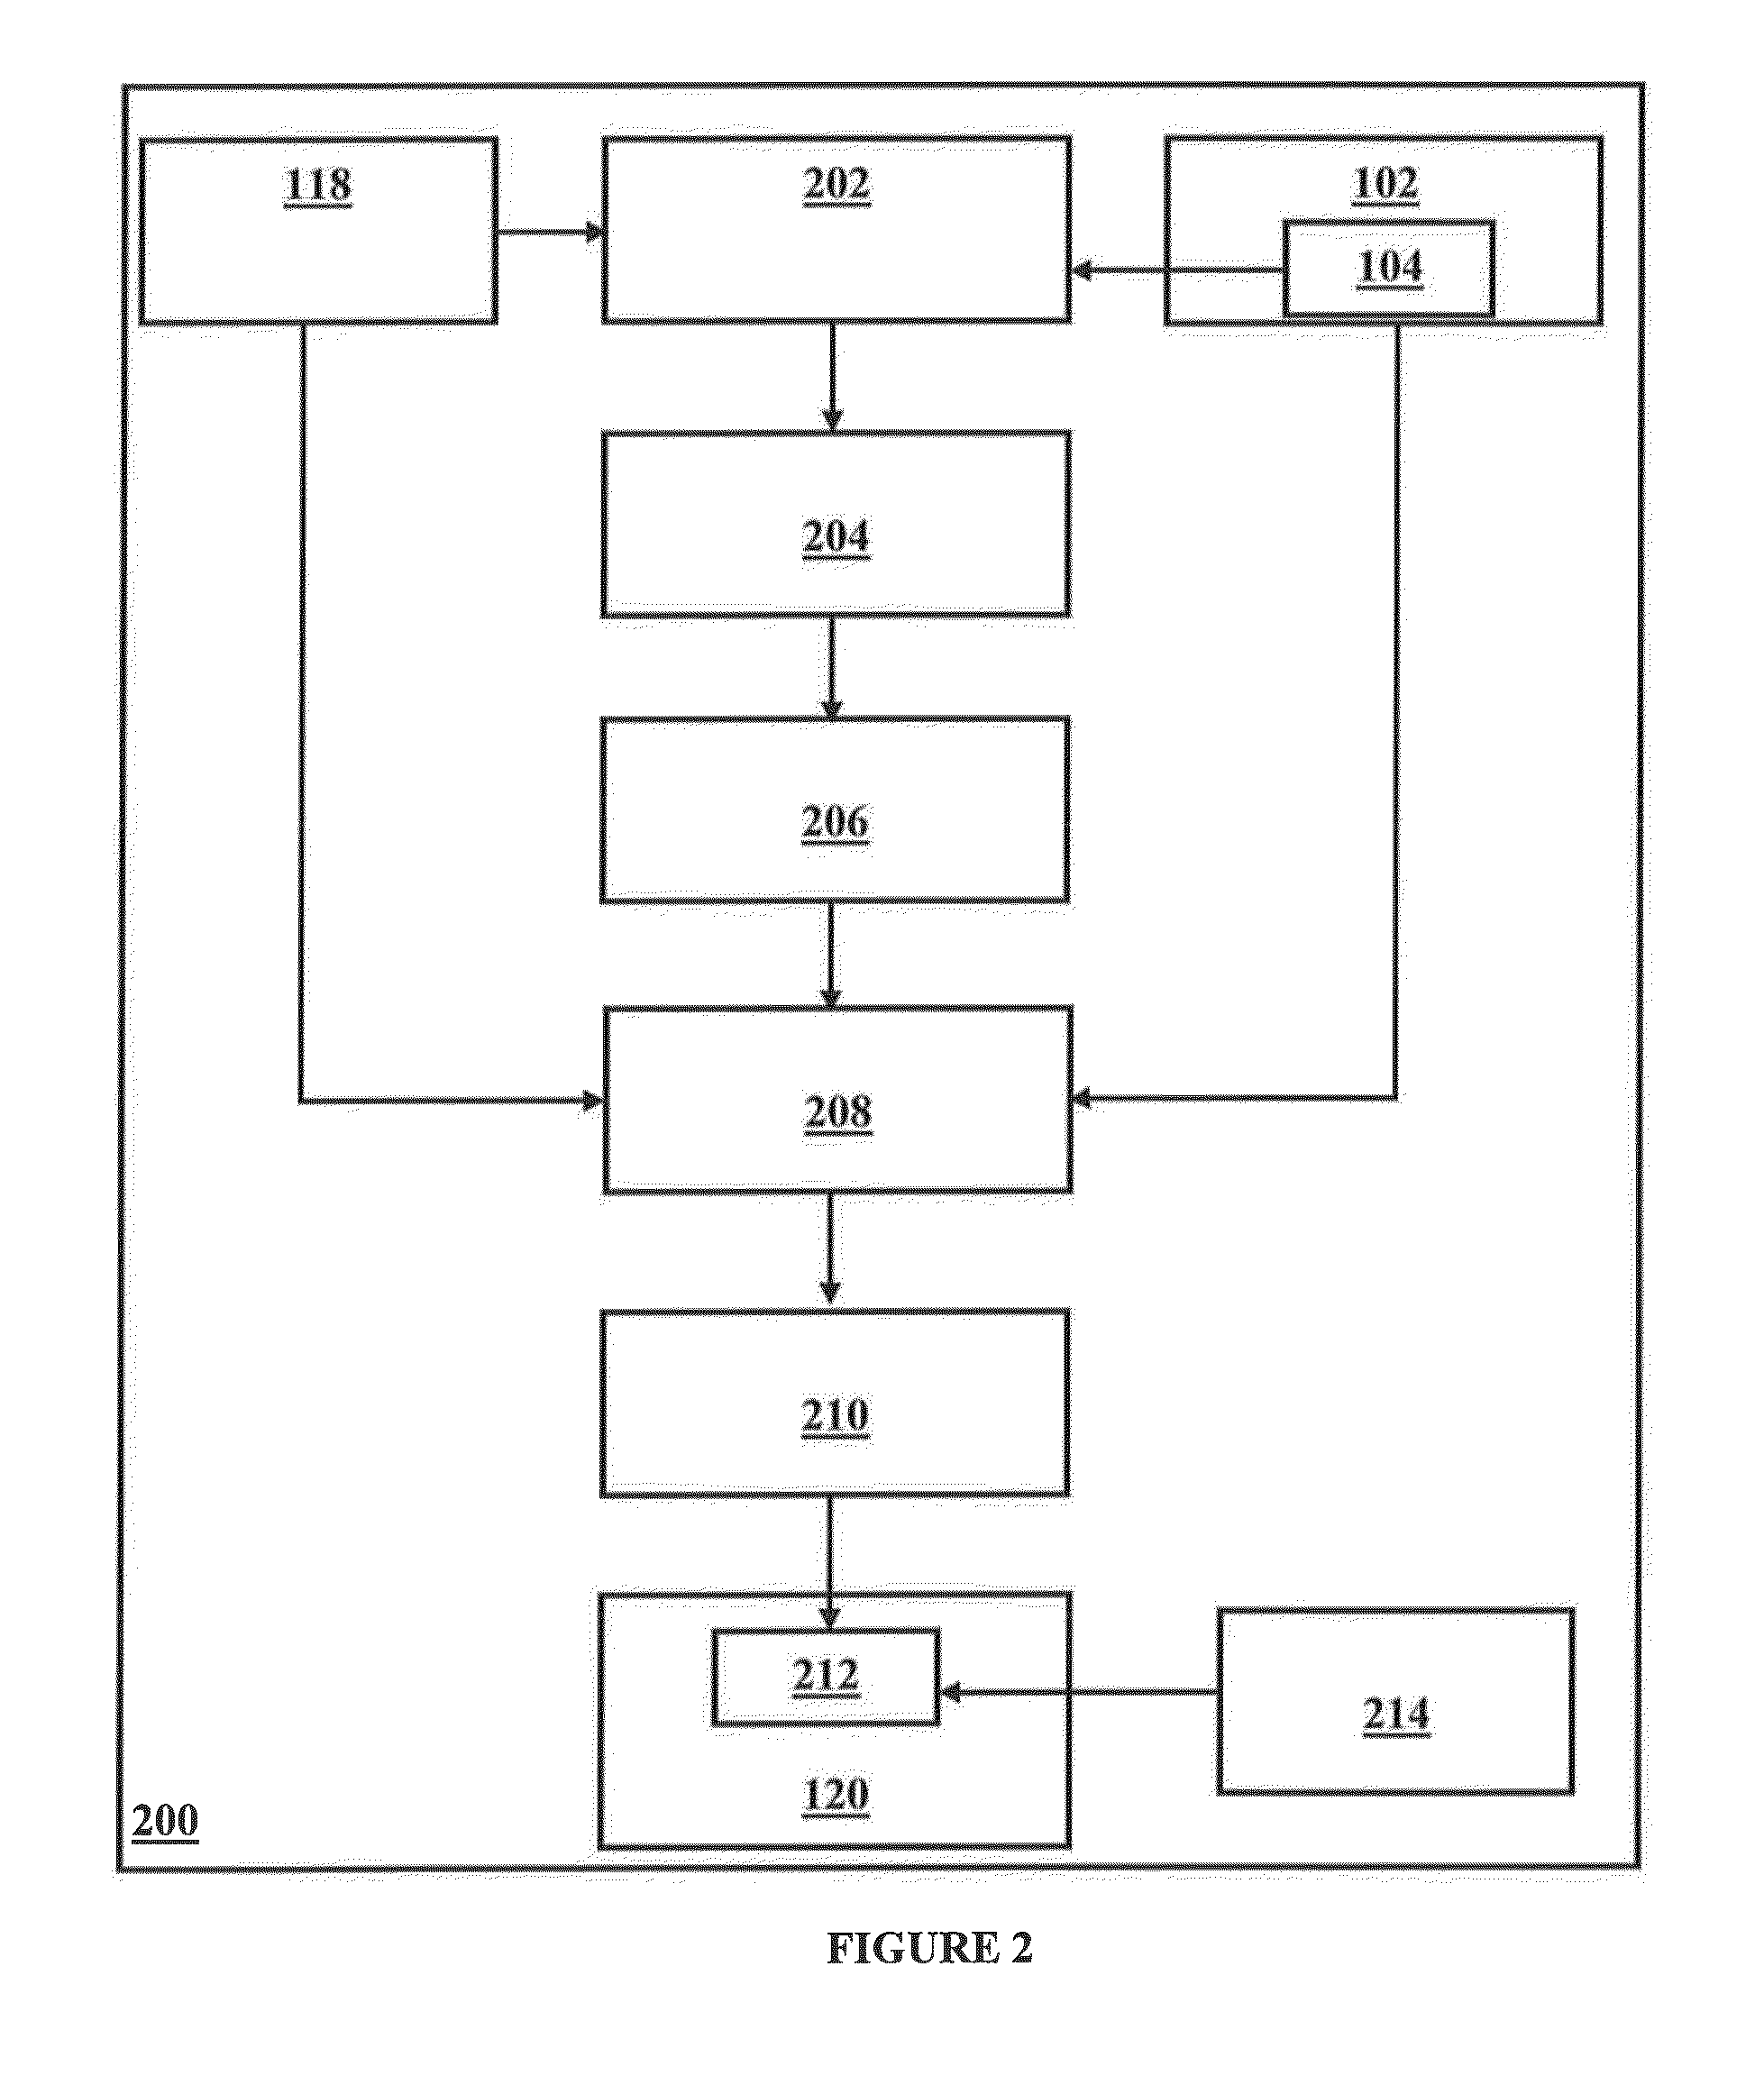 System and method for identifying and analyzing personal context of a user